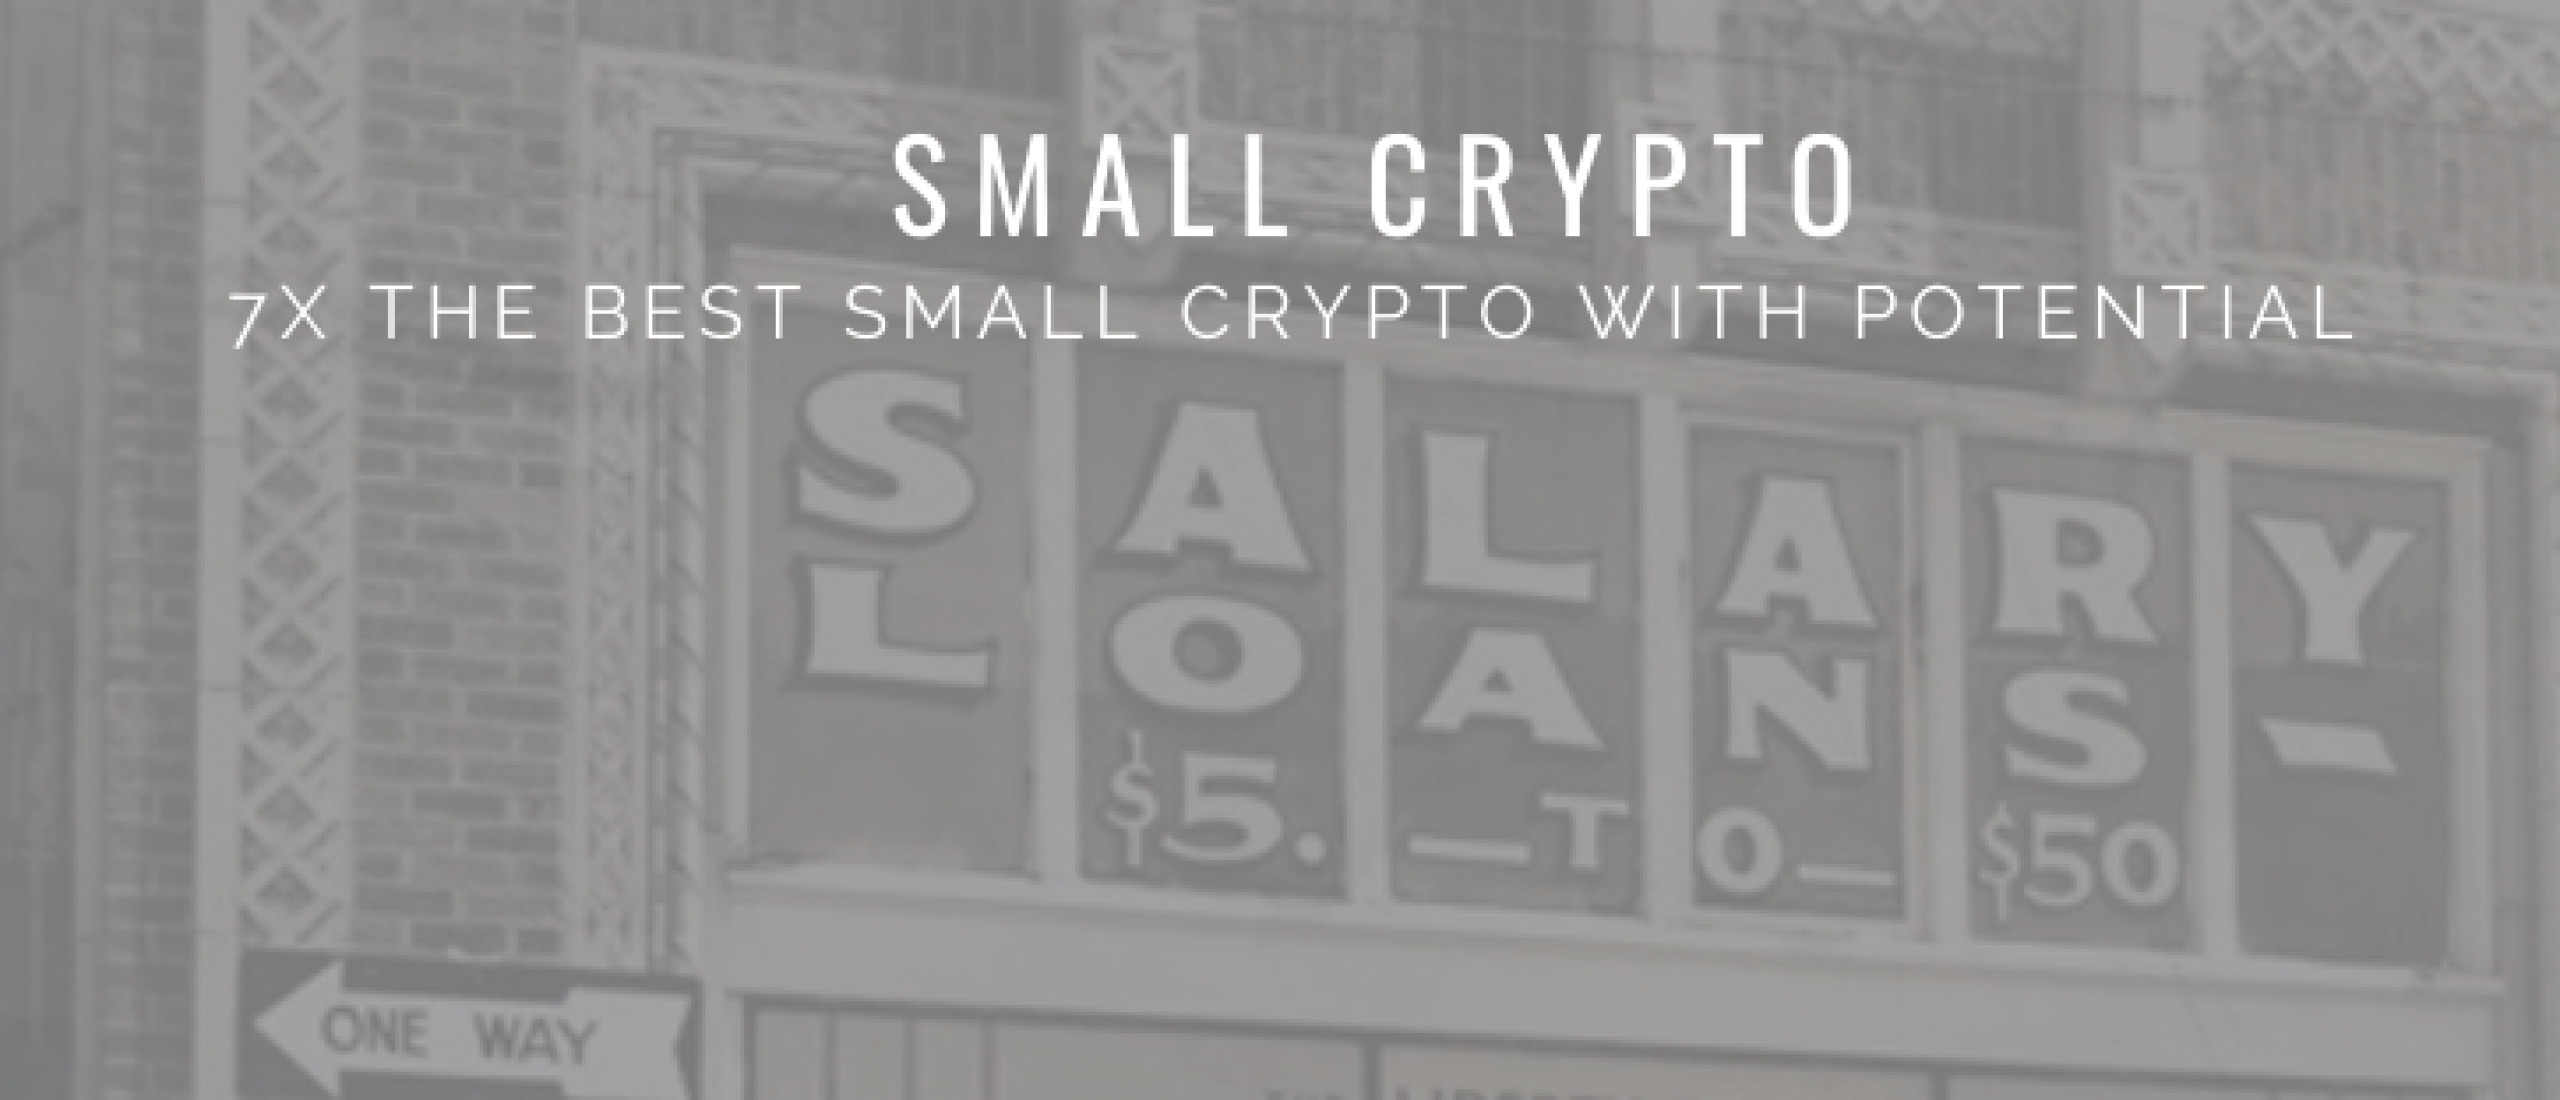 7x Best Small Crypto For Long-Term Investors